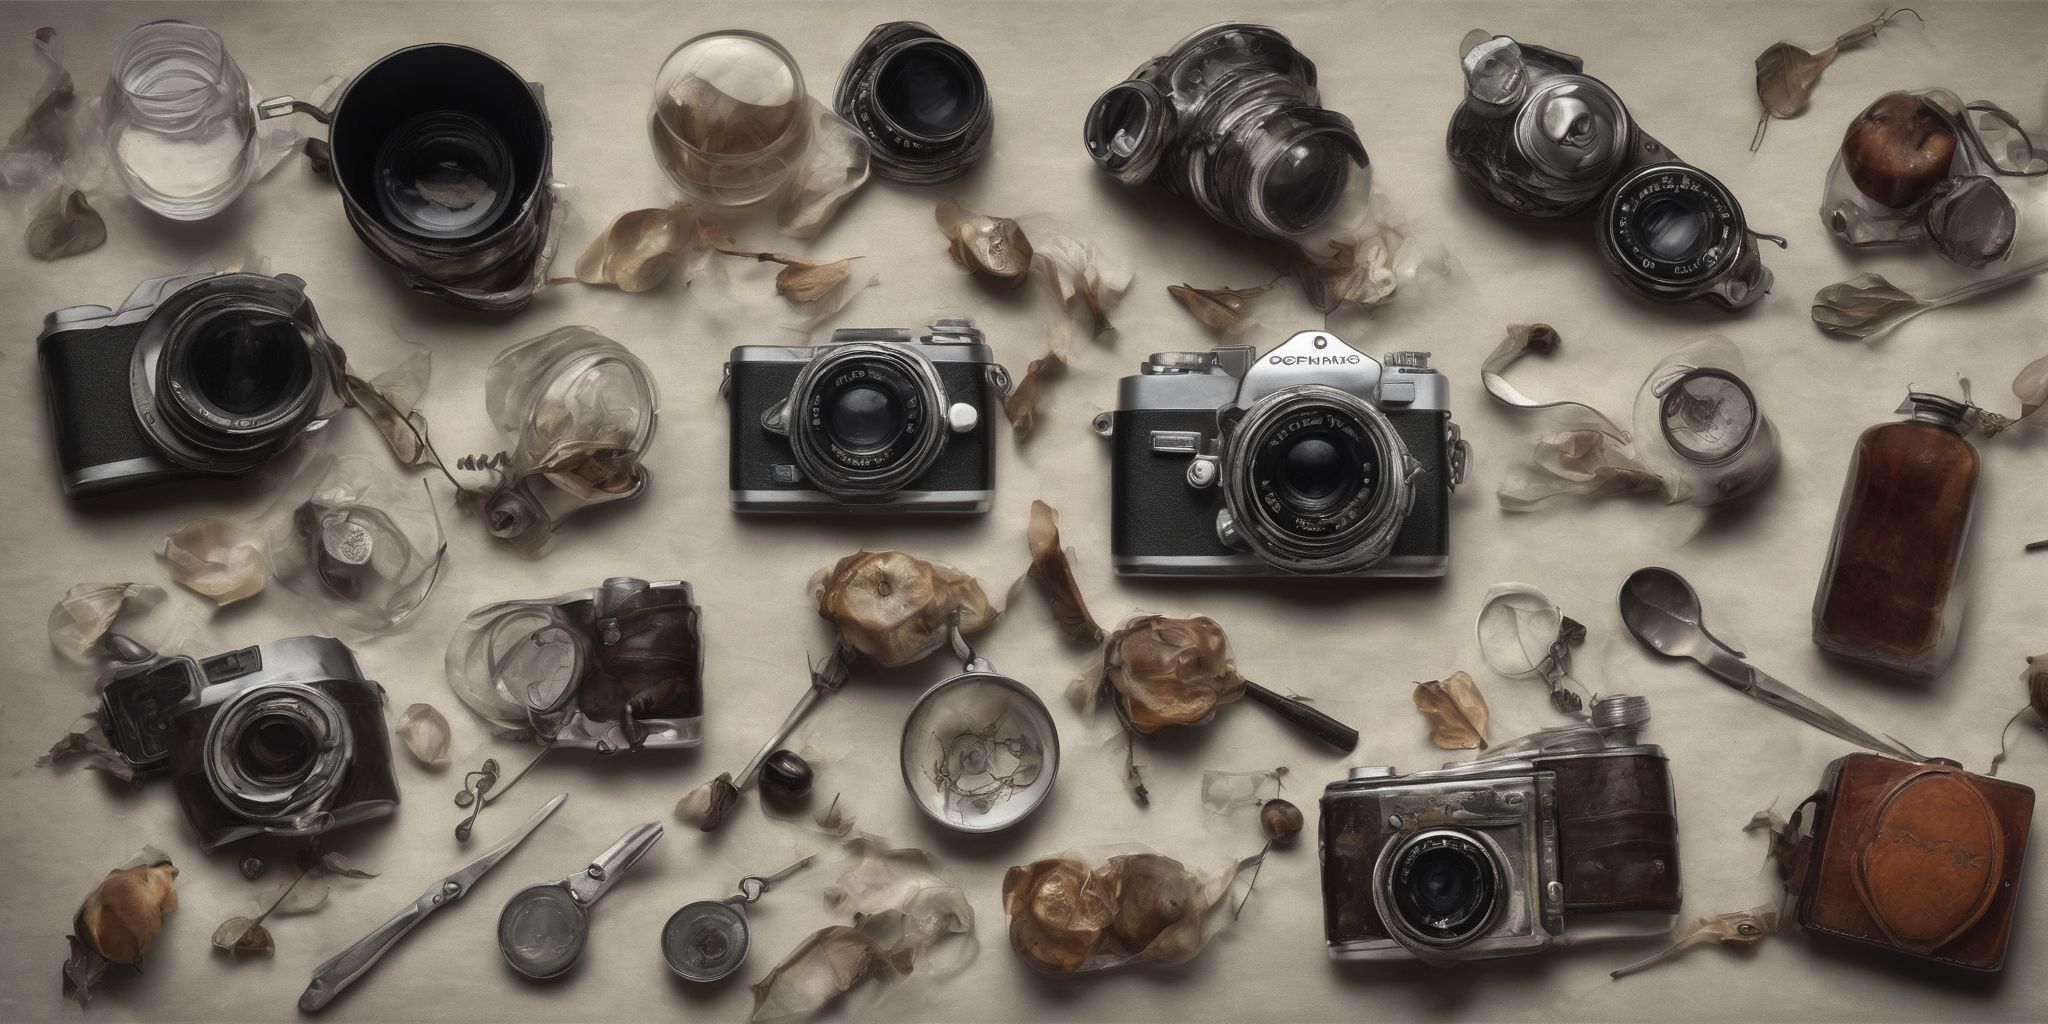 Possessions  in realistic, photographic style